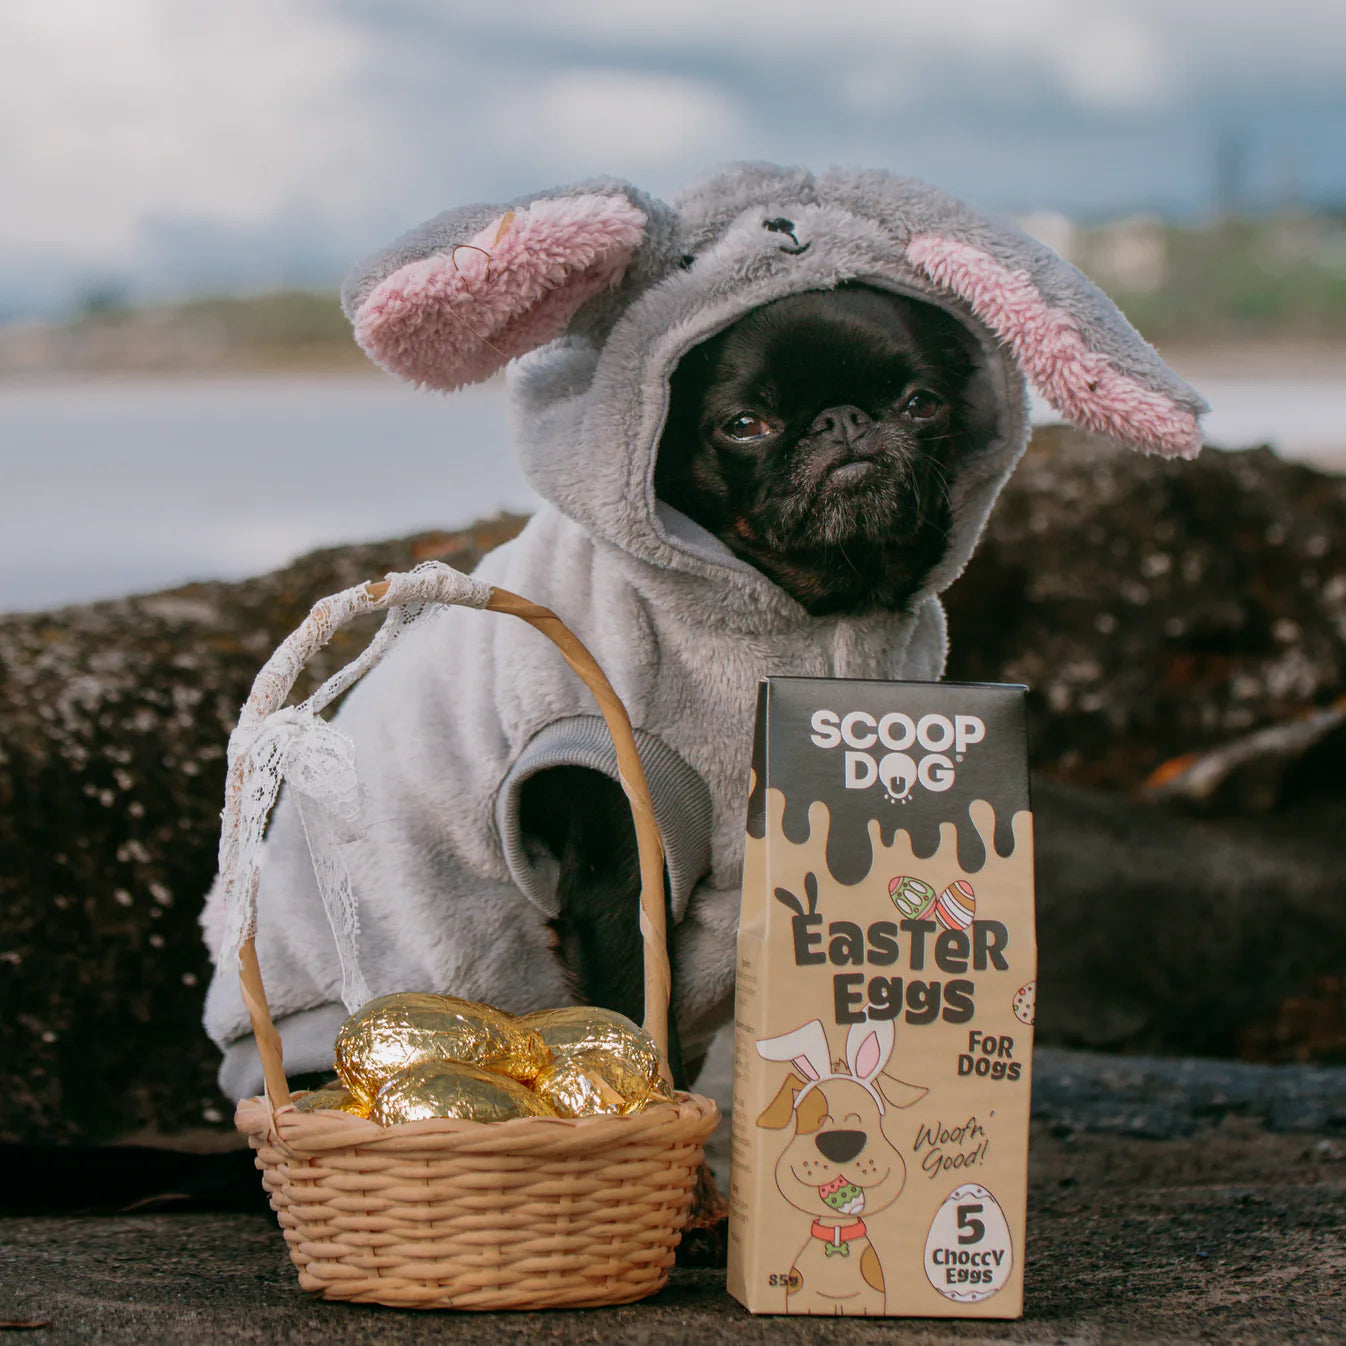 A pug dog dressed in an adorable bunny costume sitting beside a basket of golden Easter eggs and a box of Scoop Dog Easter Egg for Dogs, made with dog-friendly ingredients, ready to celebrate the holiday.